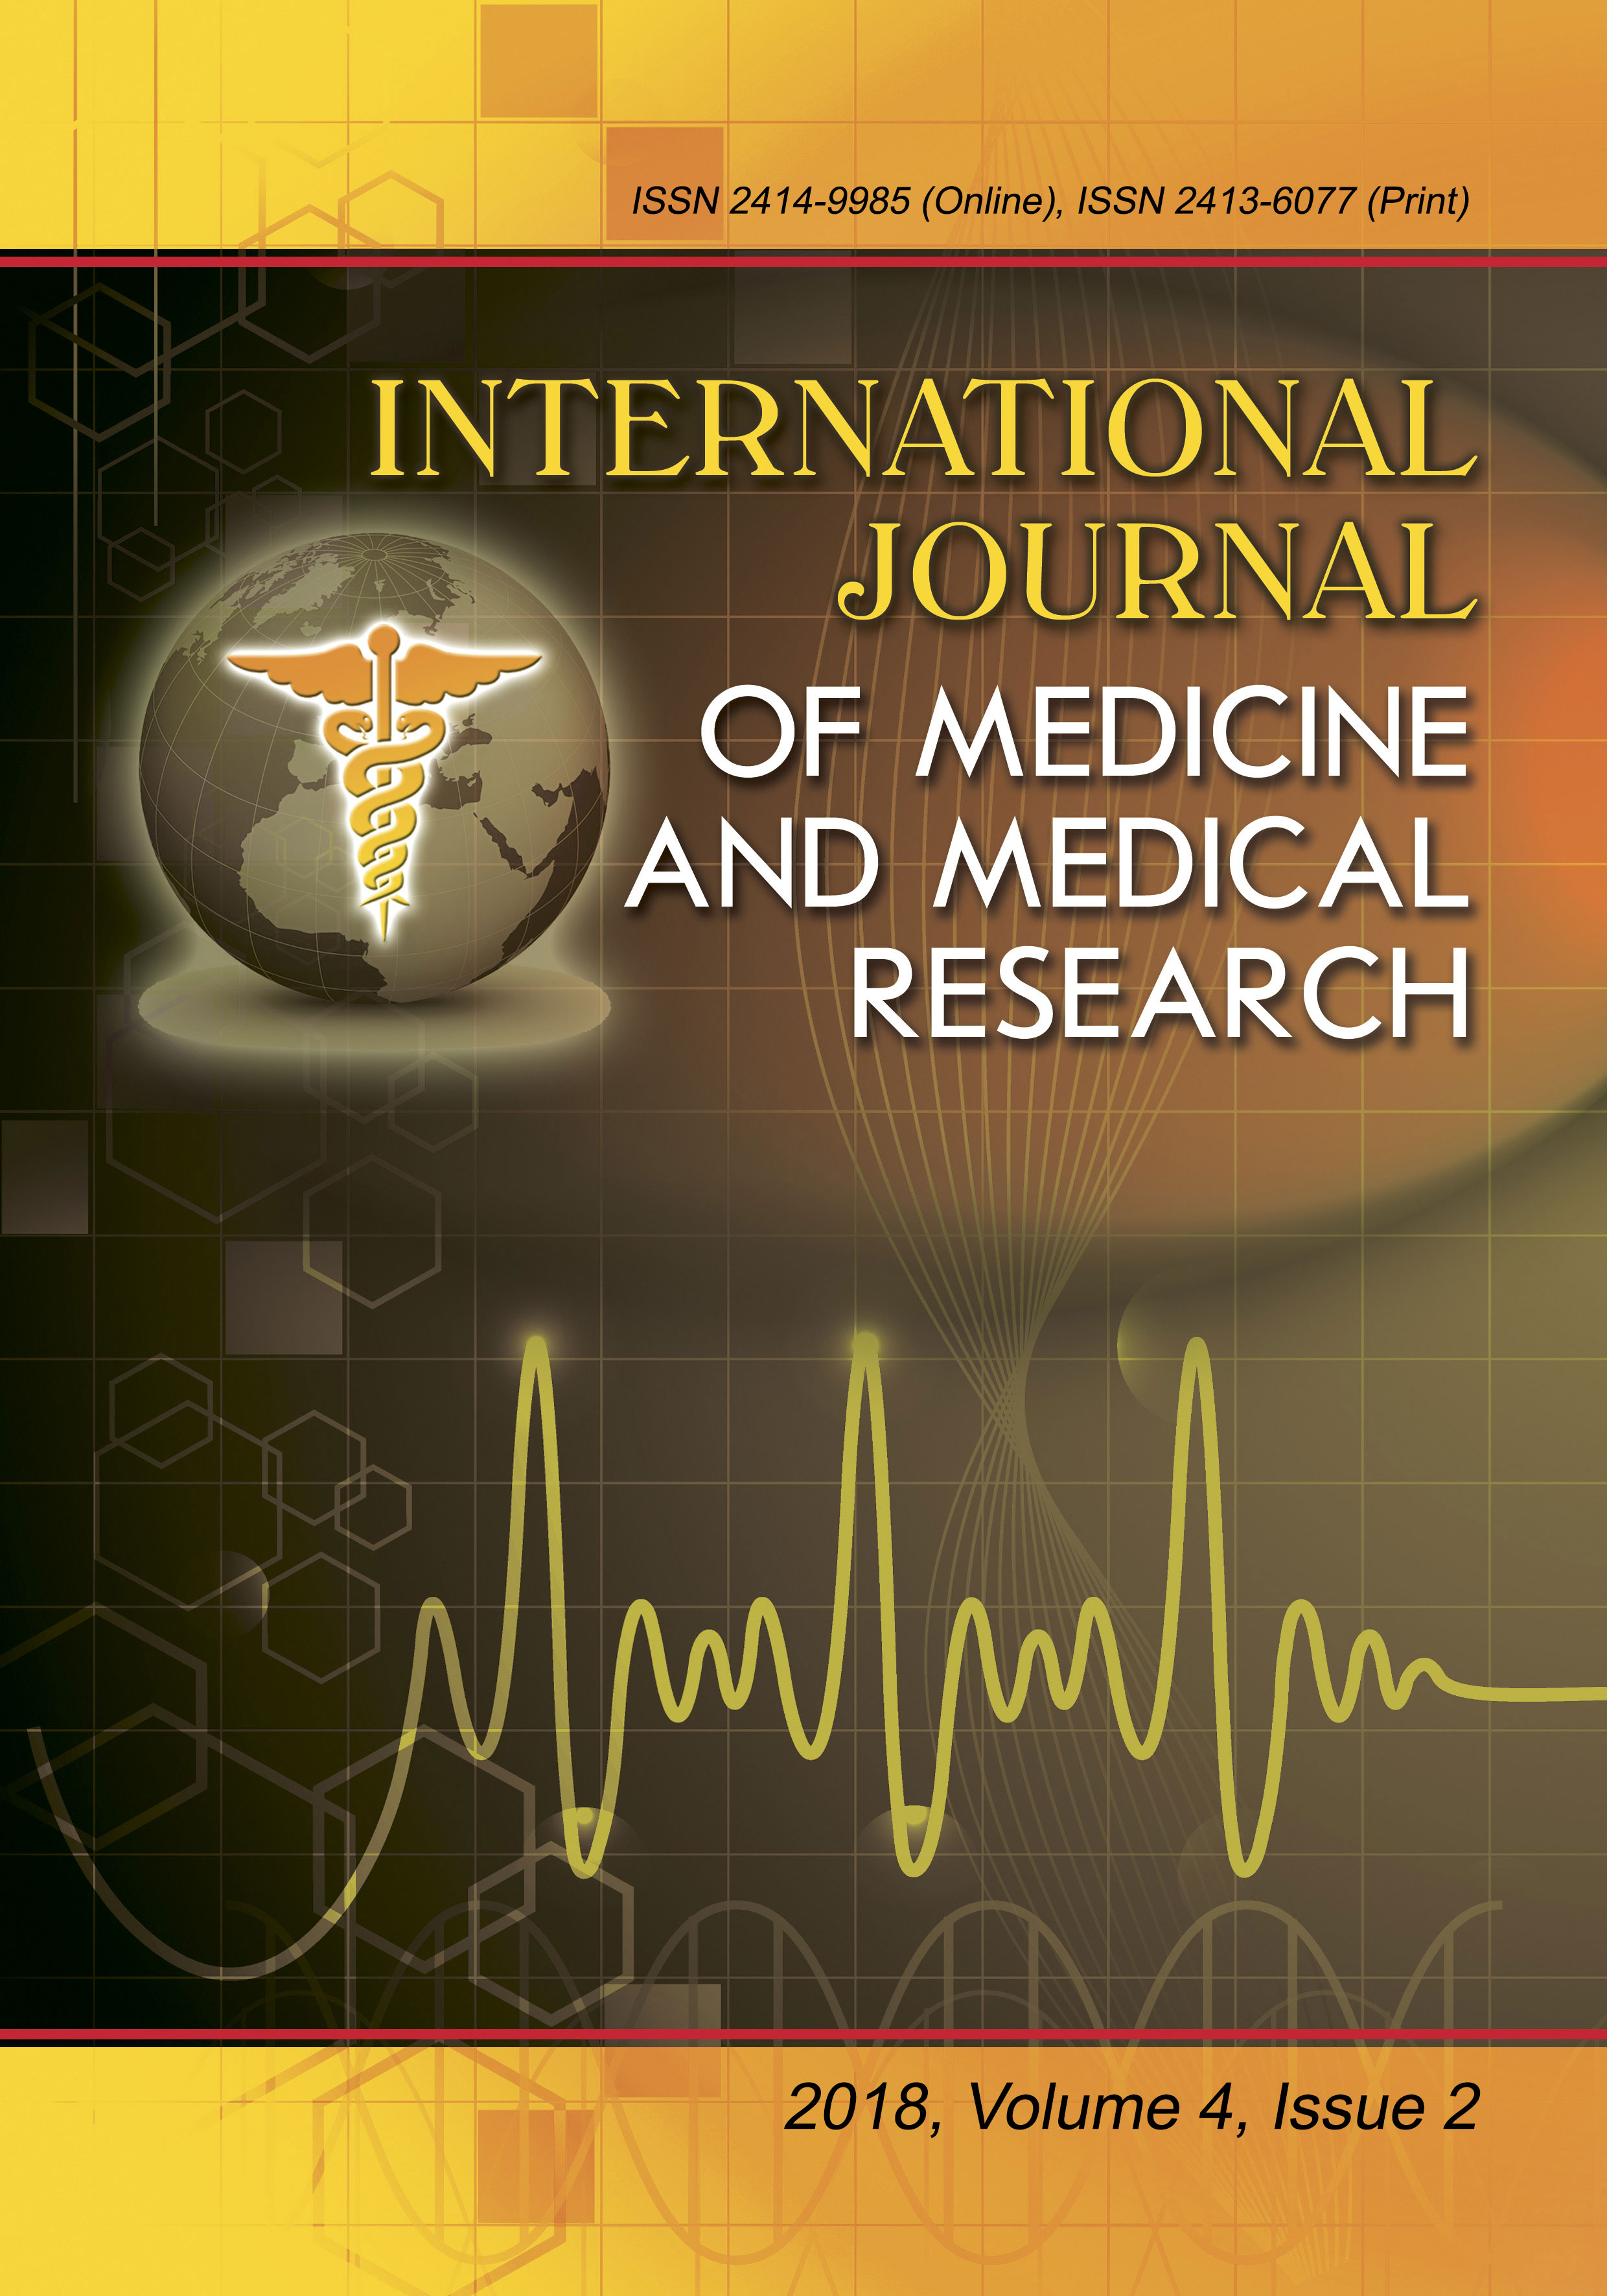 					View Vol. 4 No. 2 (2018): International Journal of Medicine and Medical Research
				